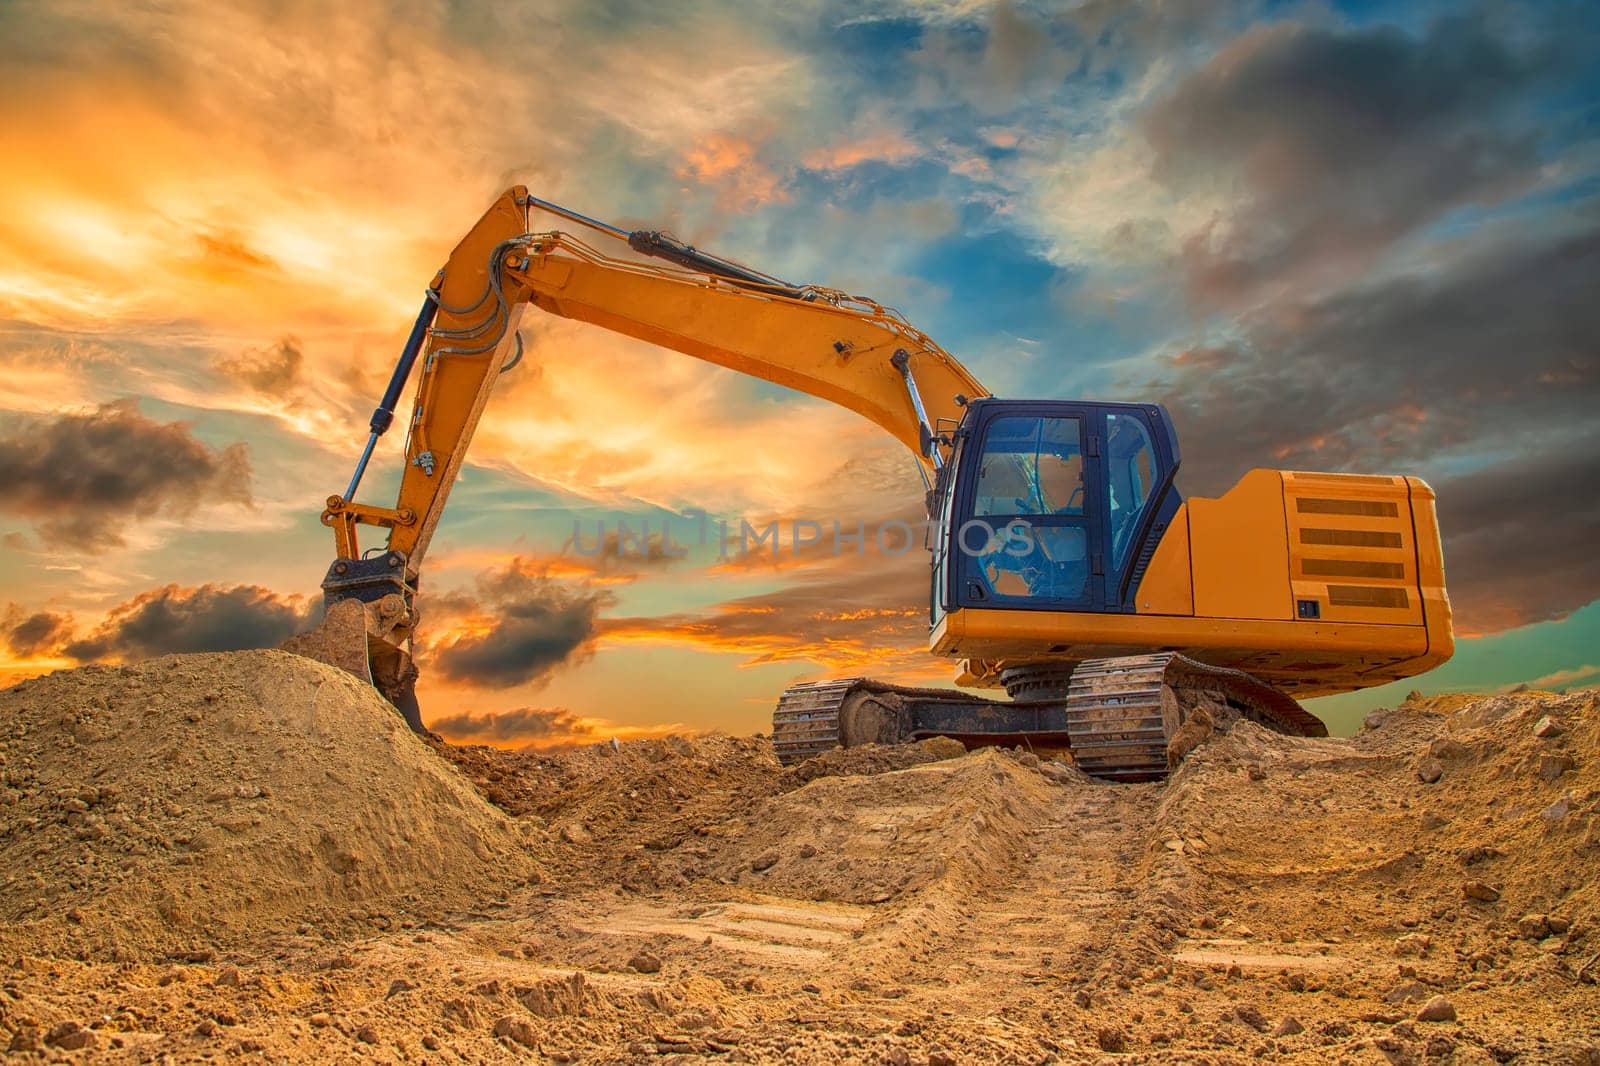 A stopping yellow excavator at an incredibly colorful sunset